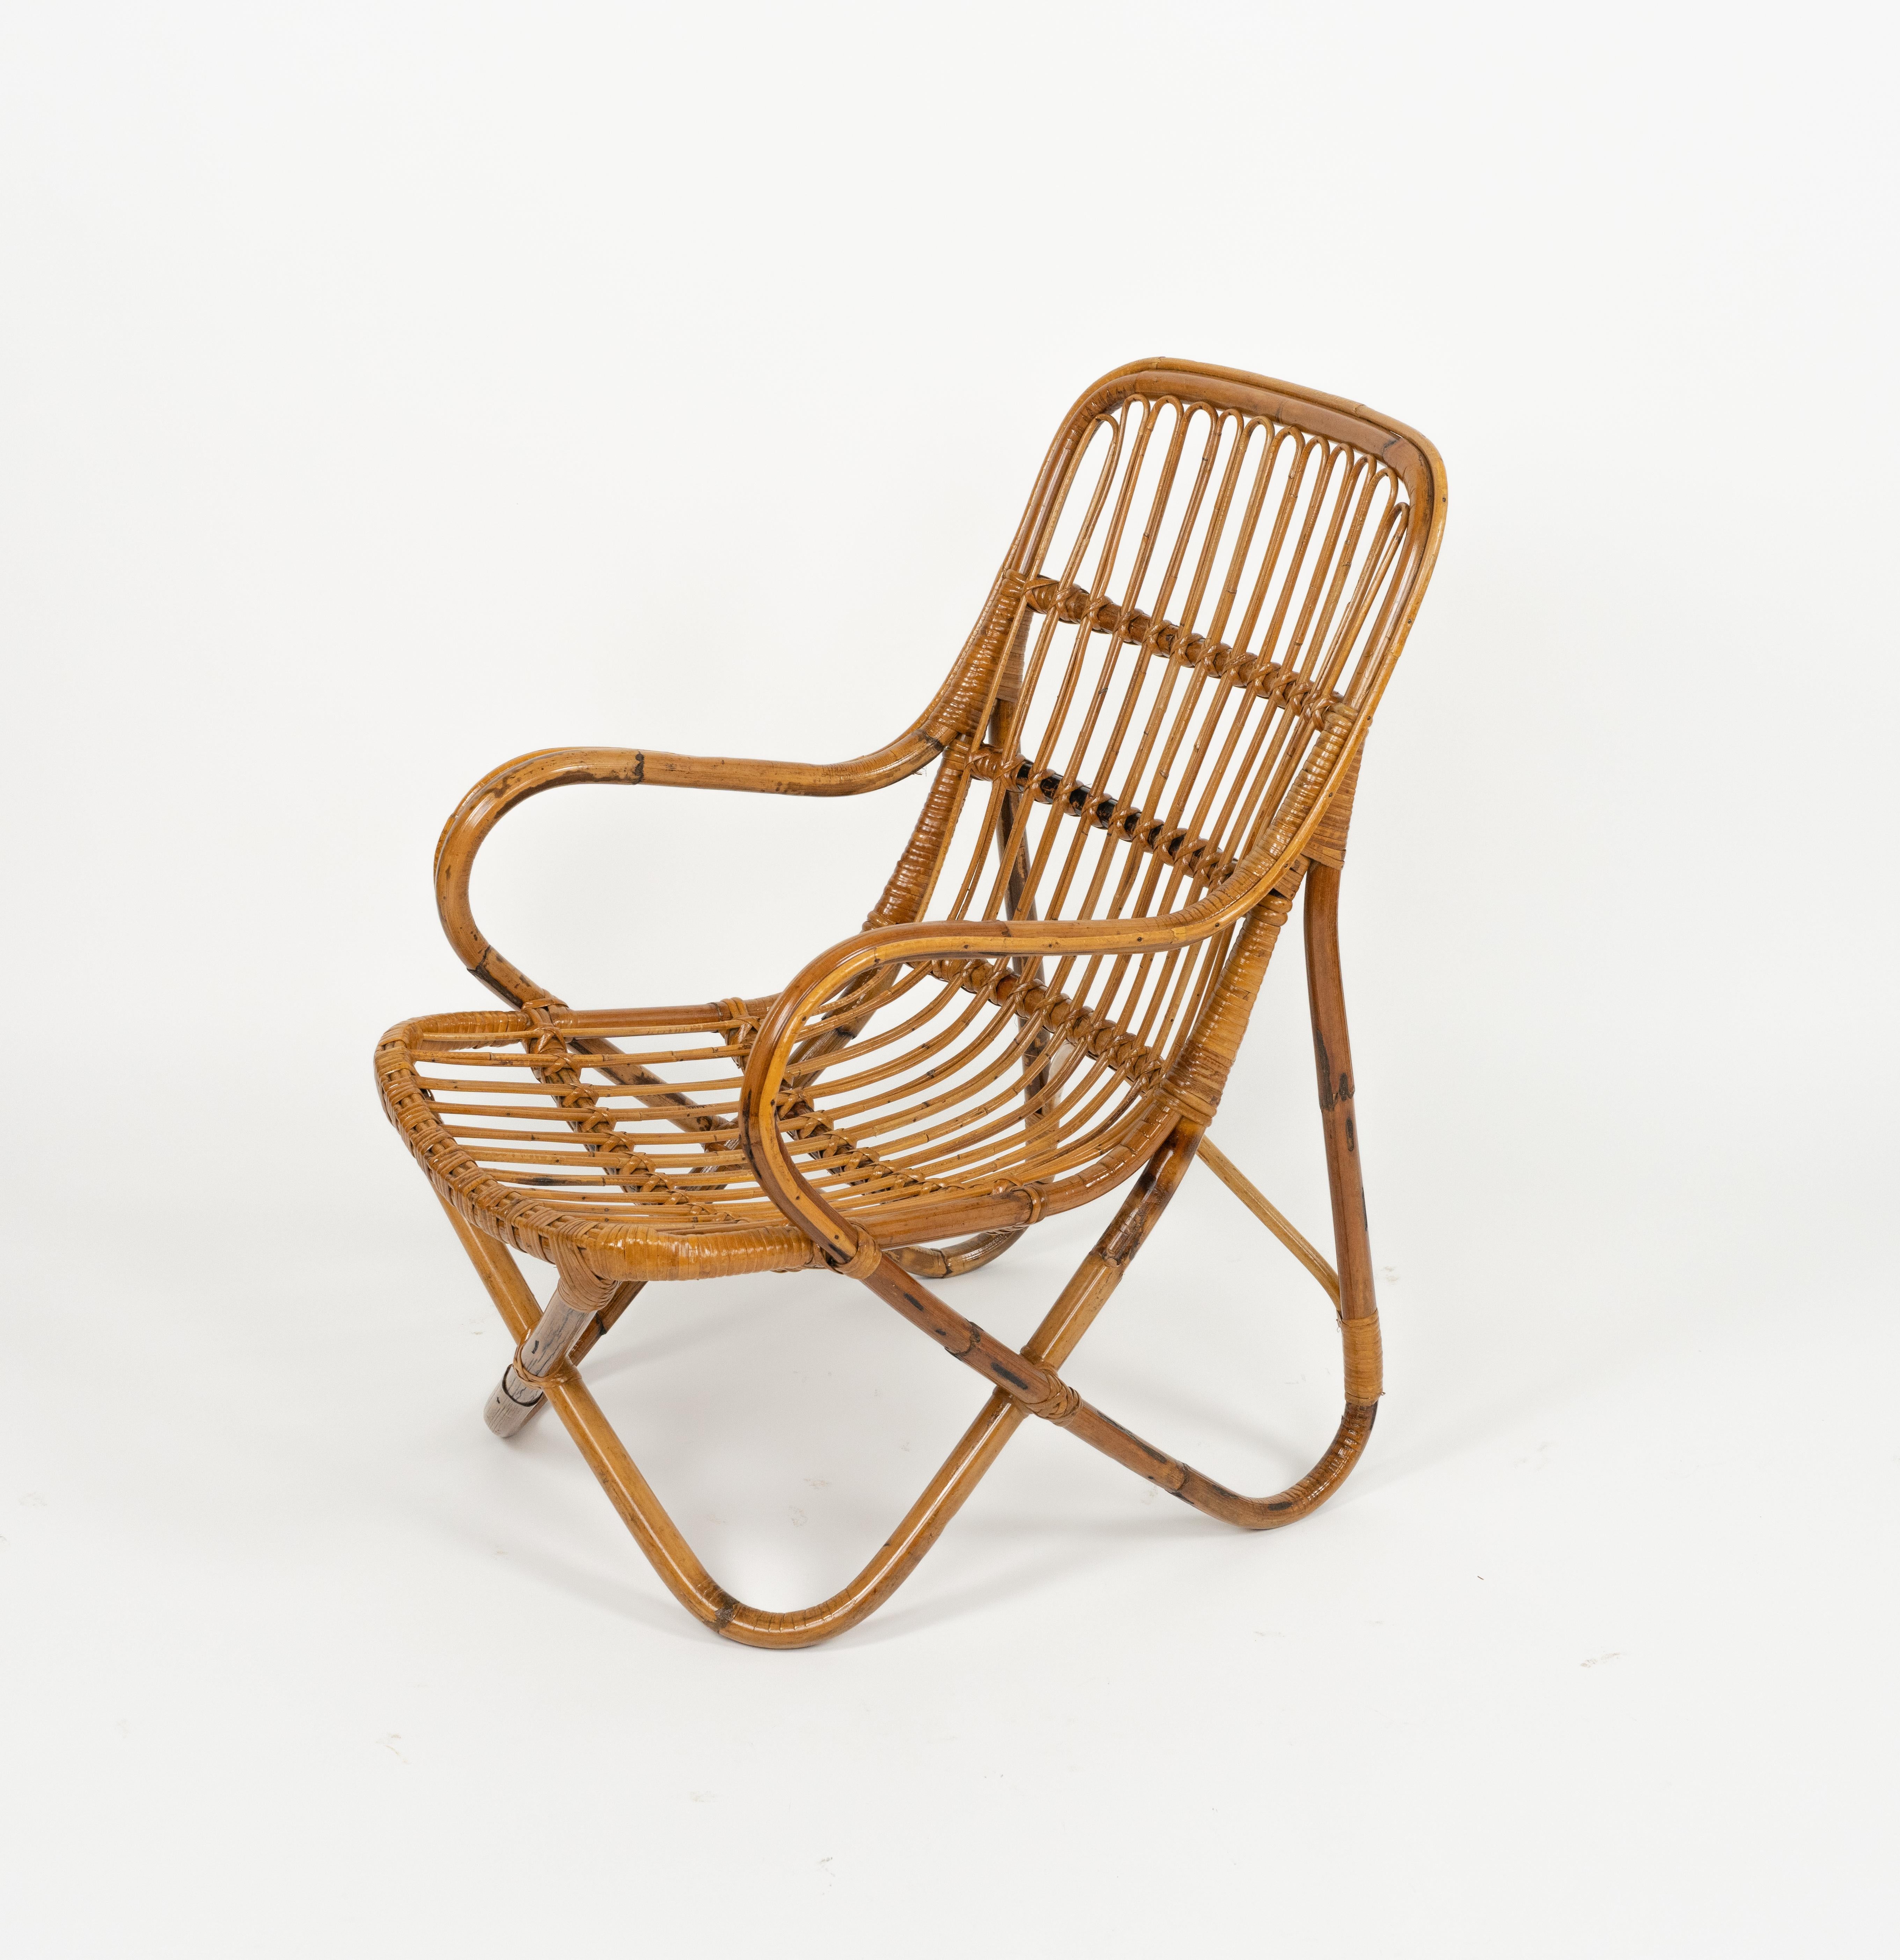 Midcentury Bamboo and Rattan Pair of Armchairs Tito Agnoli Style, Italy 1960s For Sale 5